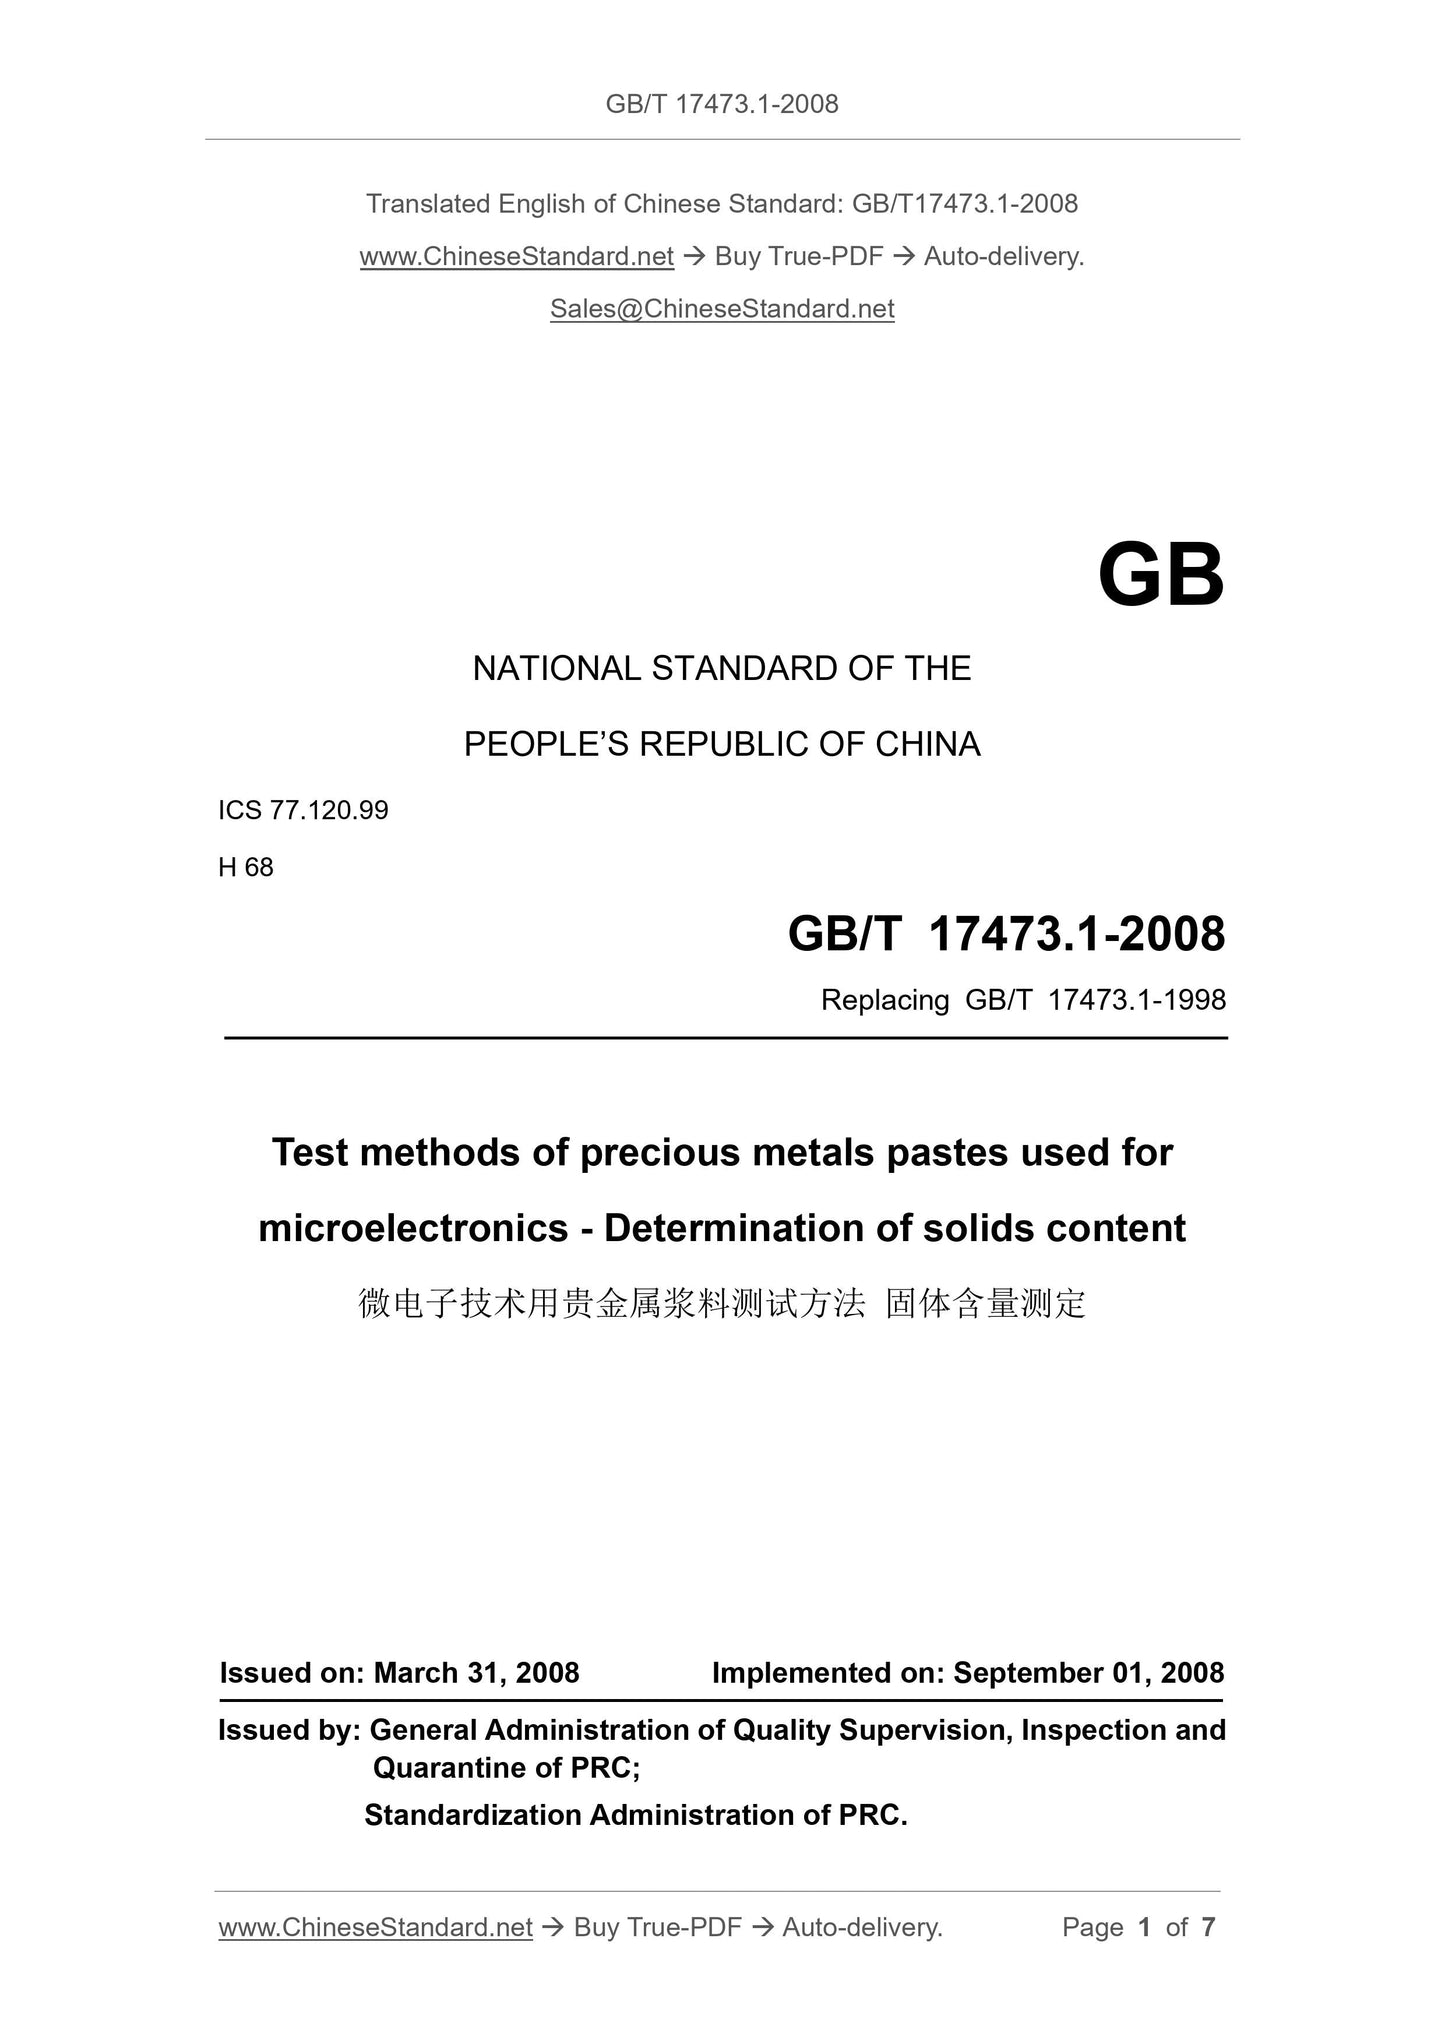 GB/T 17473.1-2008 Page 1